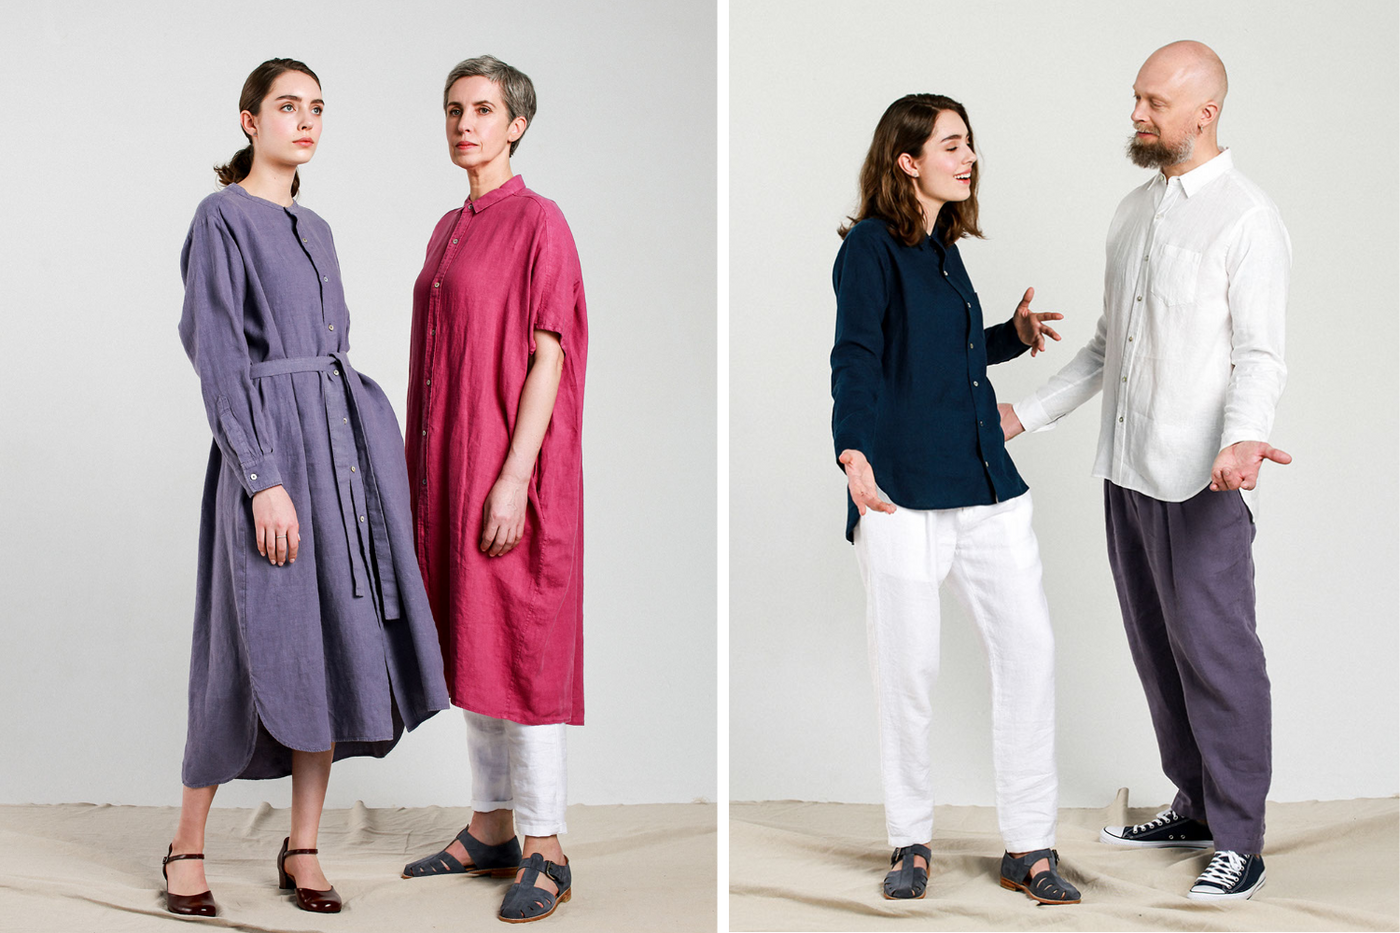 LINEN TALES + JAPAN CLOTHING COLLECTION IS BACK! - Linen Tales